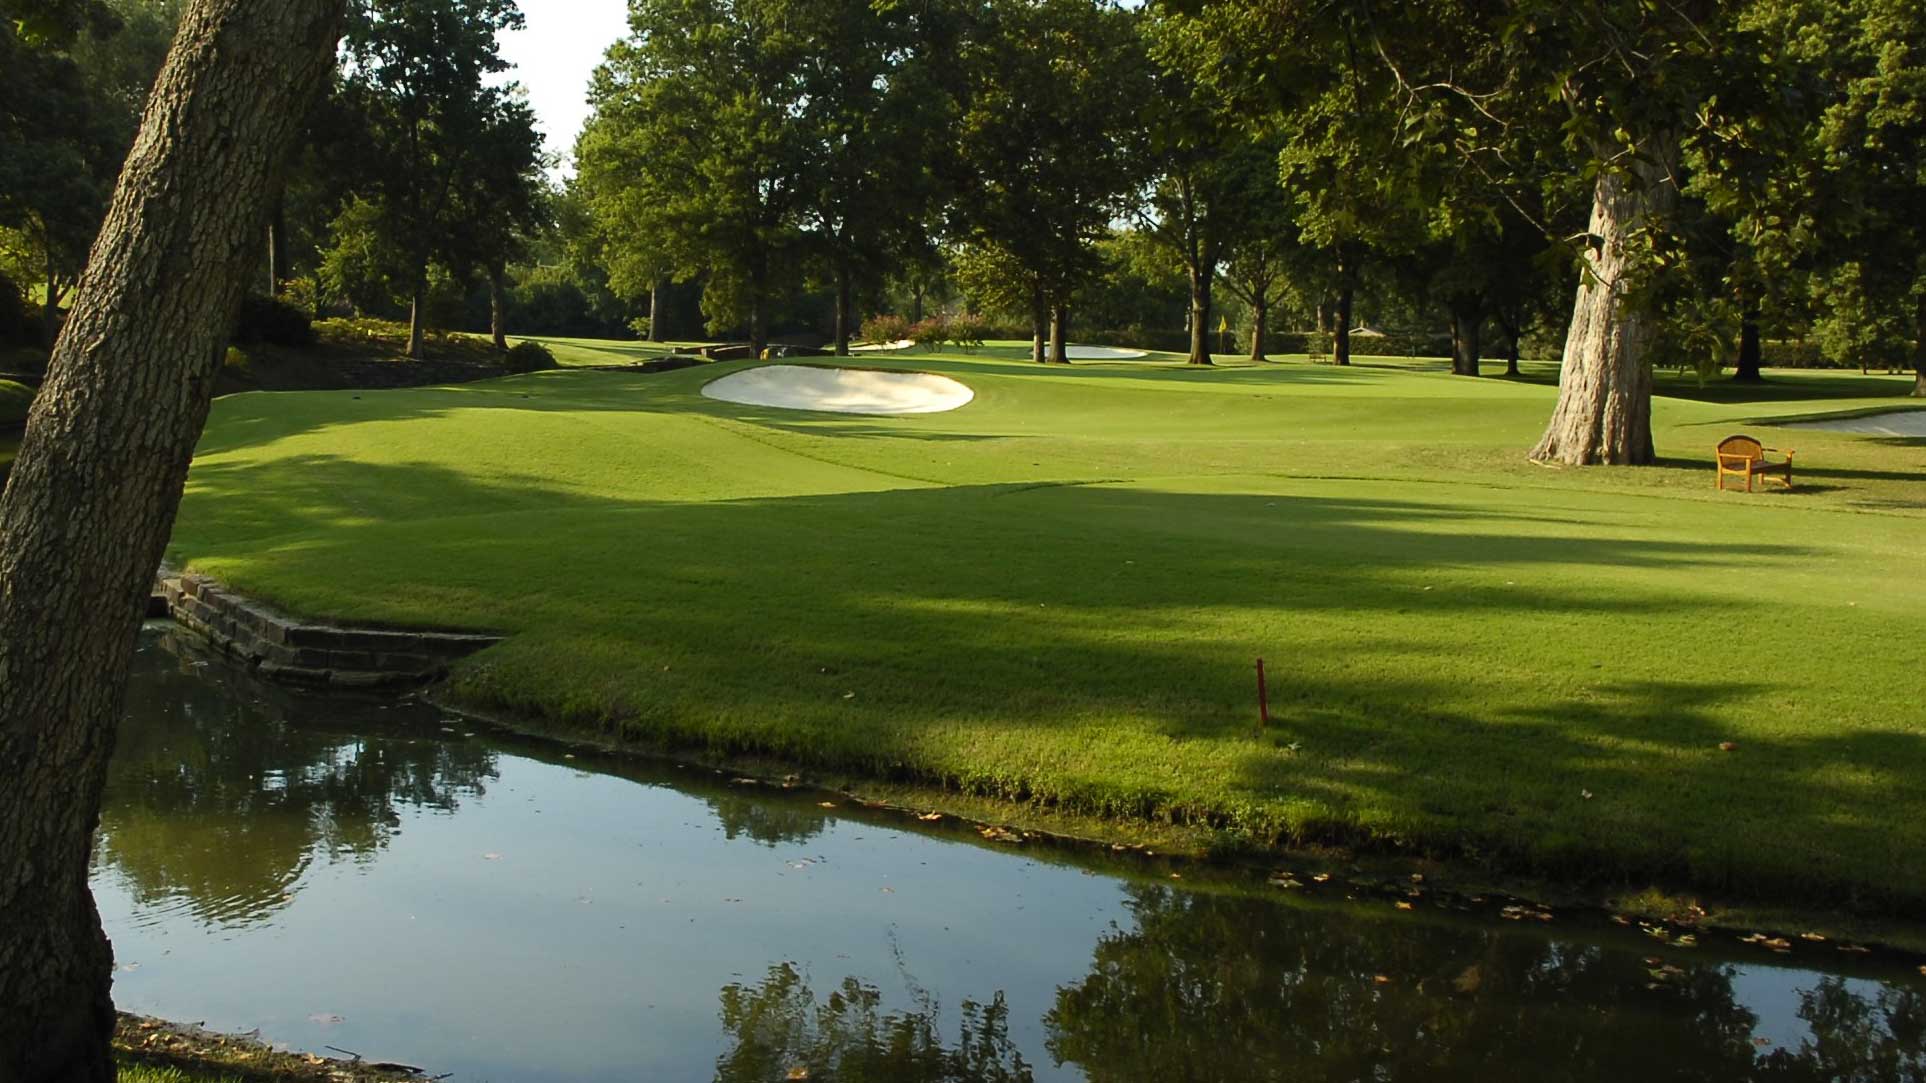 Best golf courses in Oklahoma, according to GOLF Magazine’s expert course raters